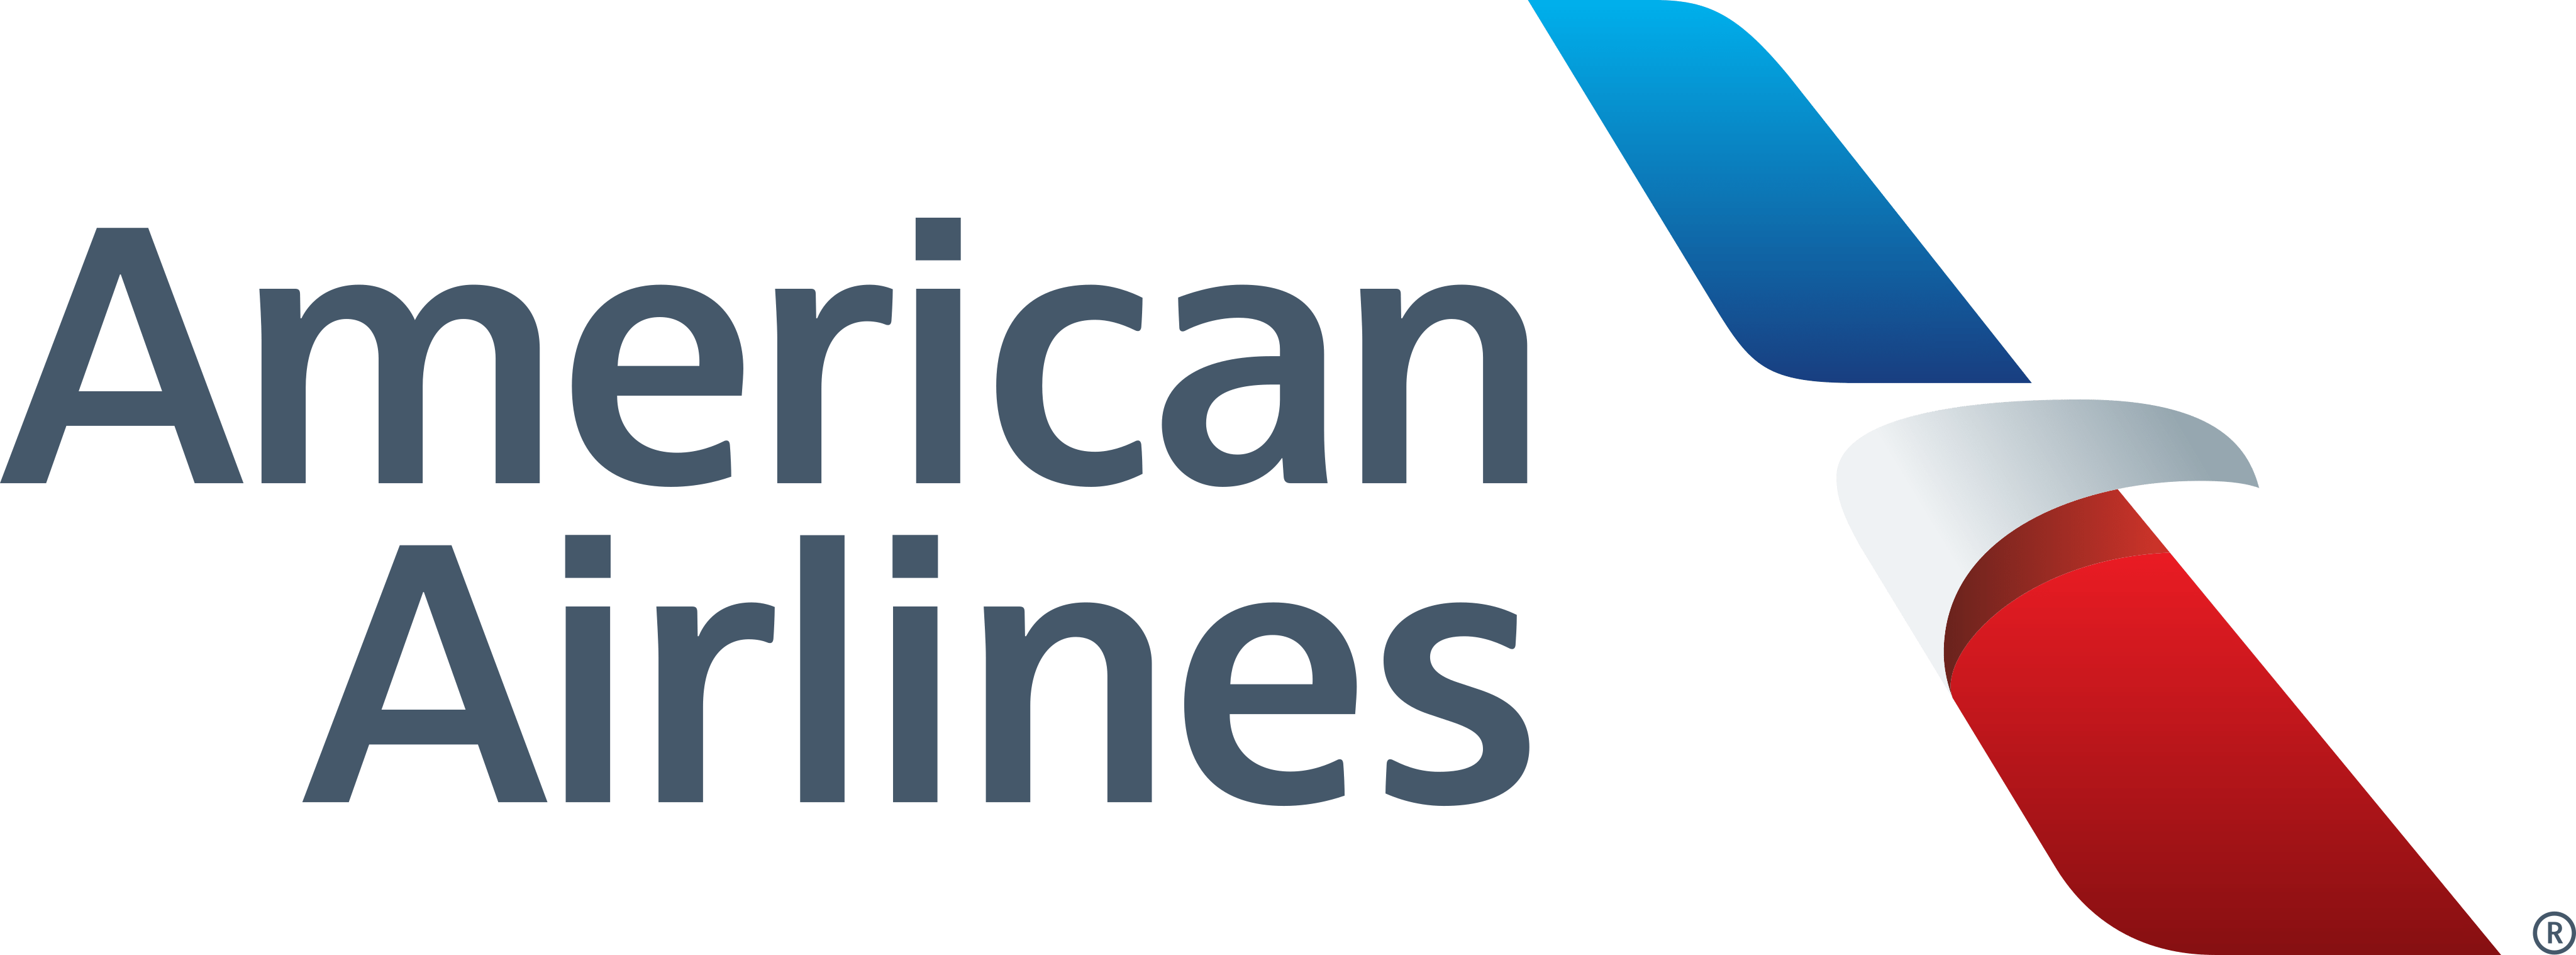 american-airlines-logo-1